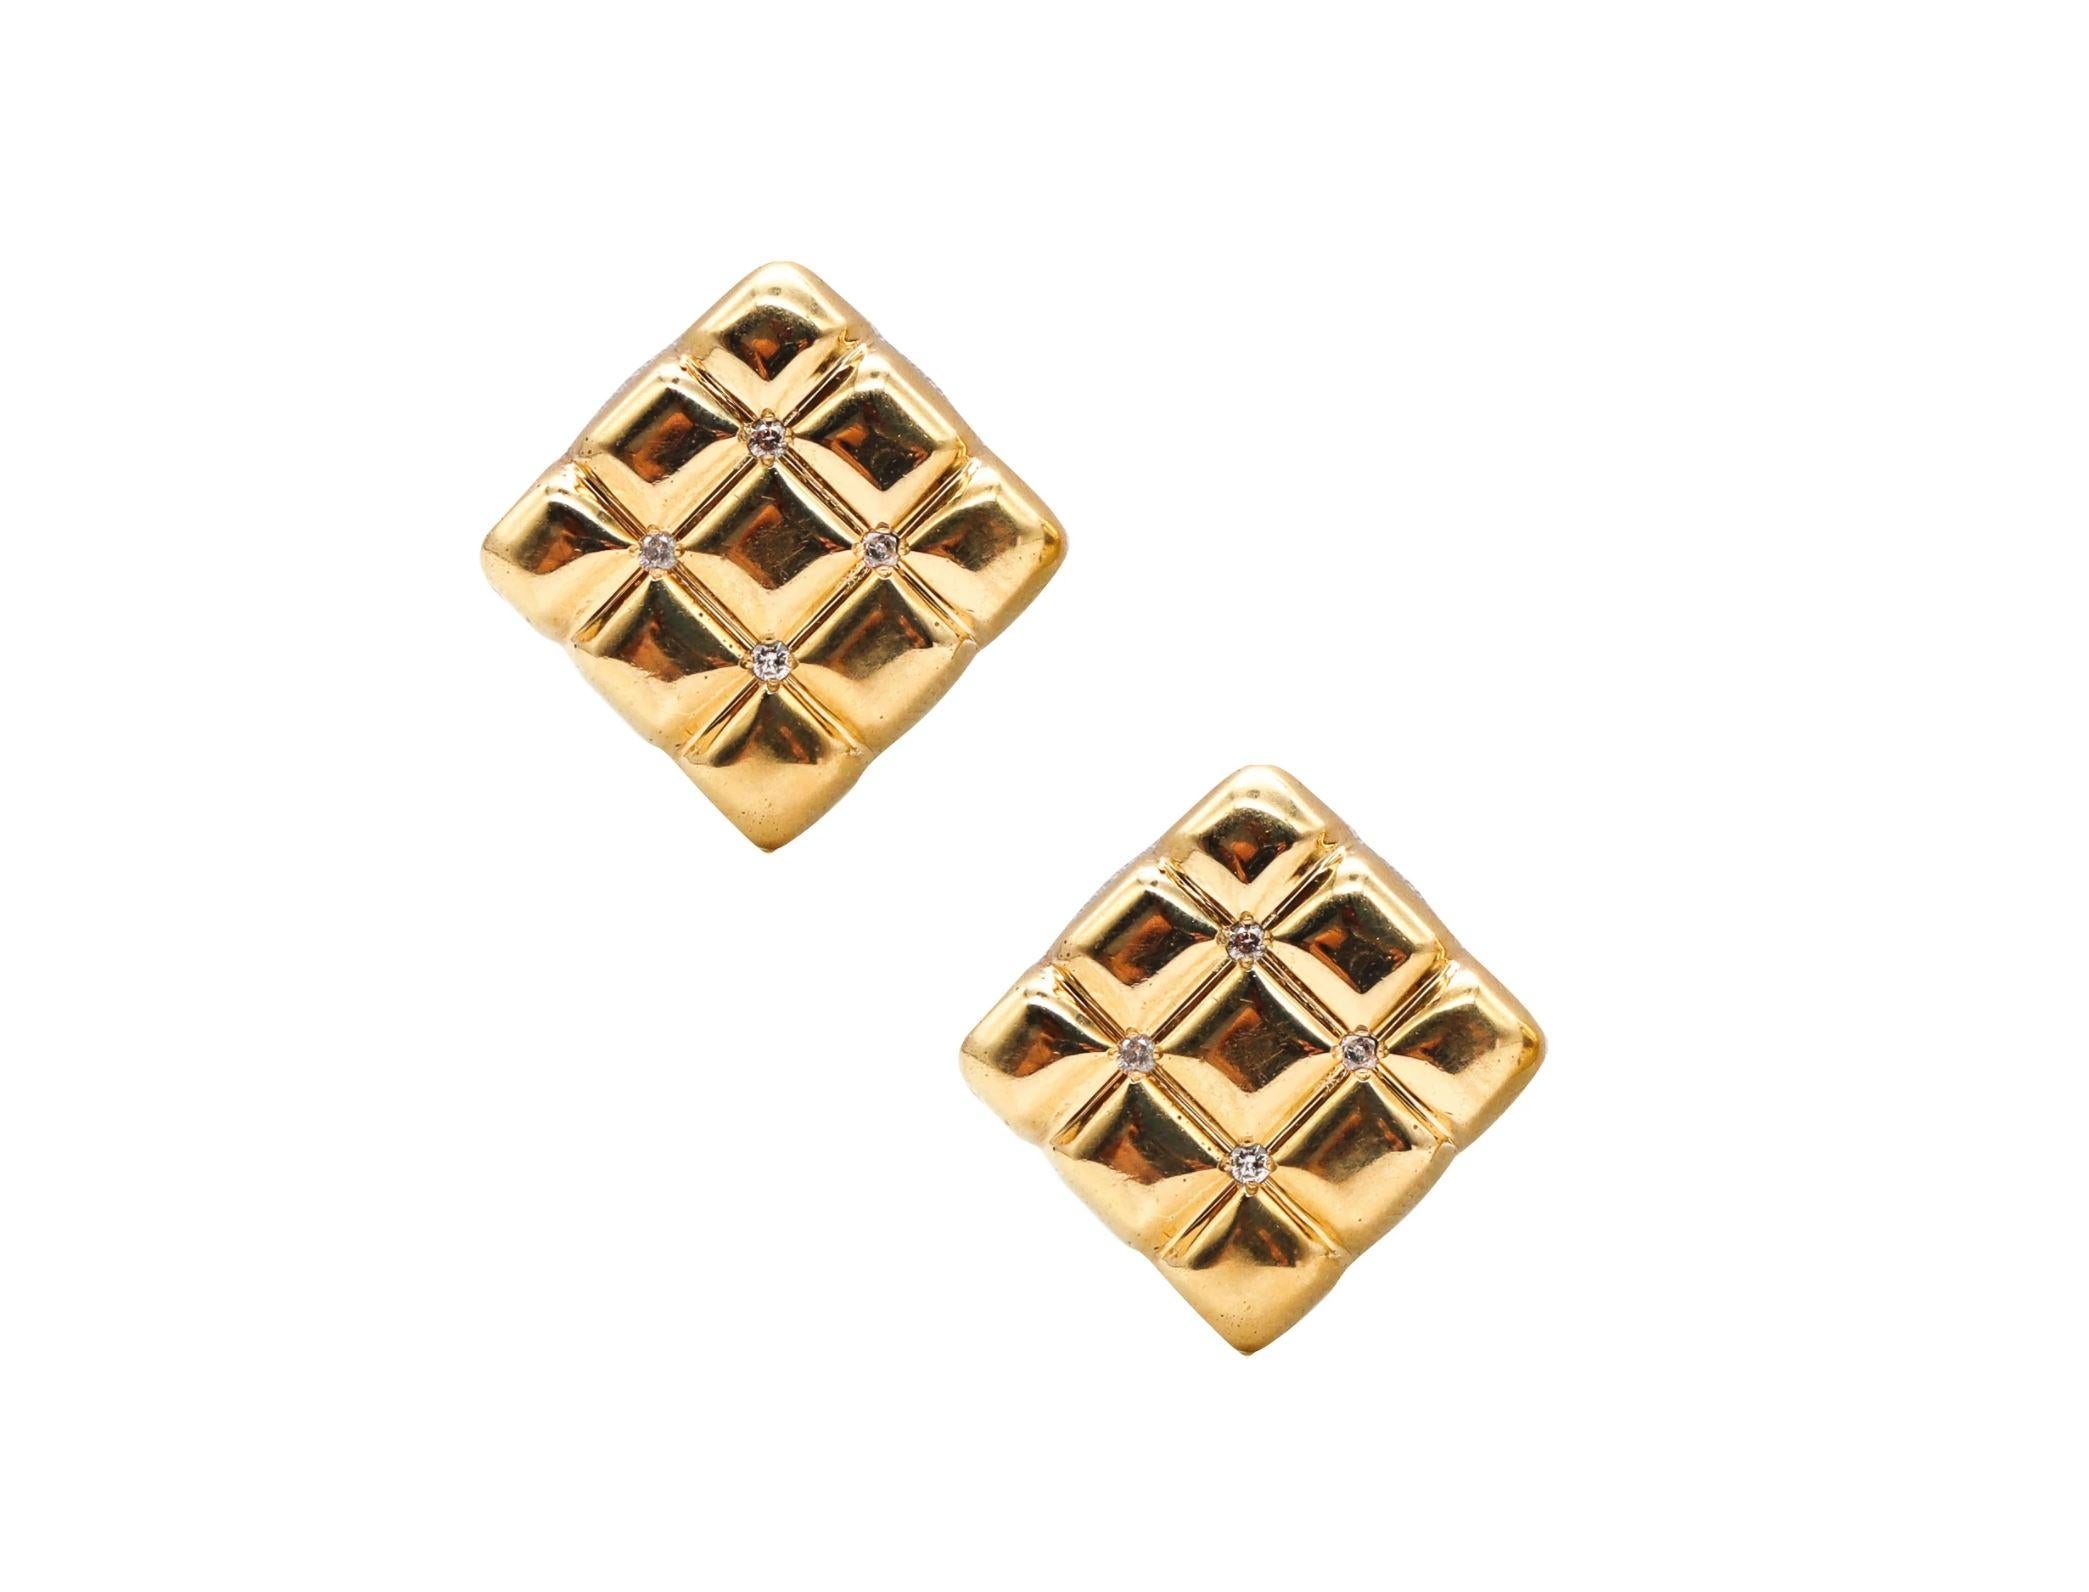 Brilliant Cut Aldo Cipullo 1970 New York Quilted Clip Earrings 18Kt Yellow Gold with Diamonds For Sale